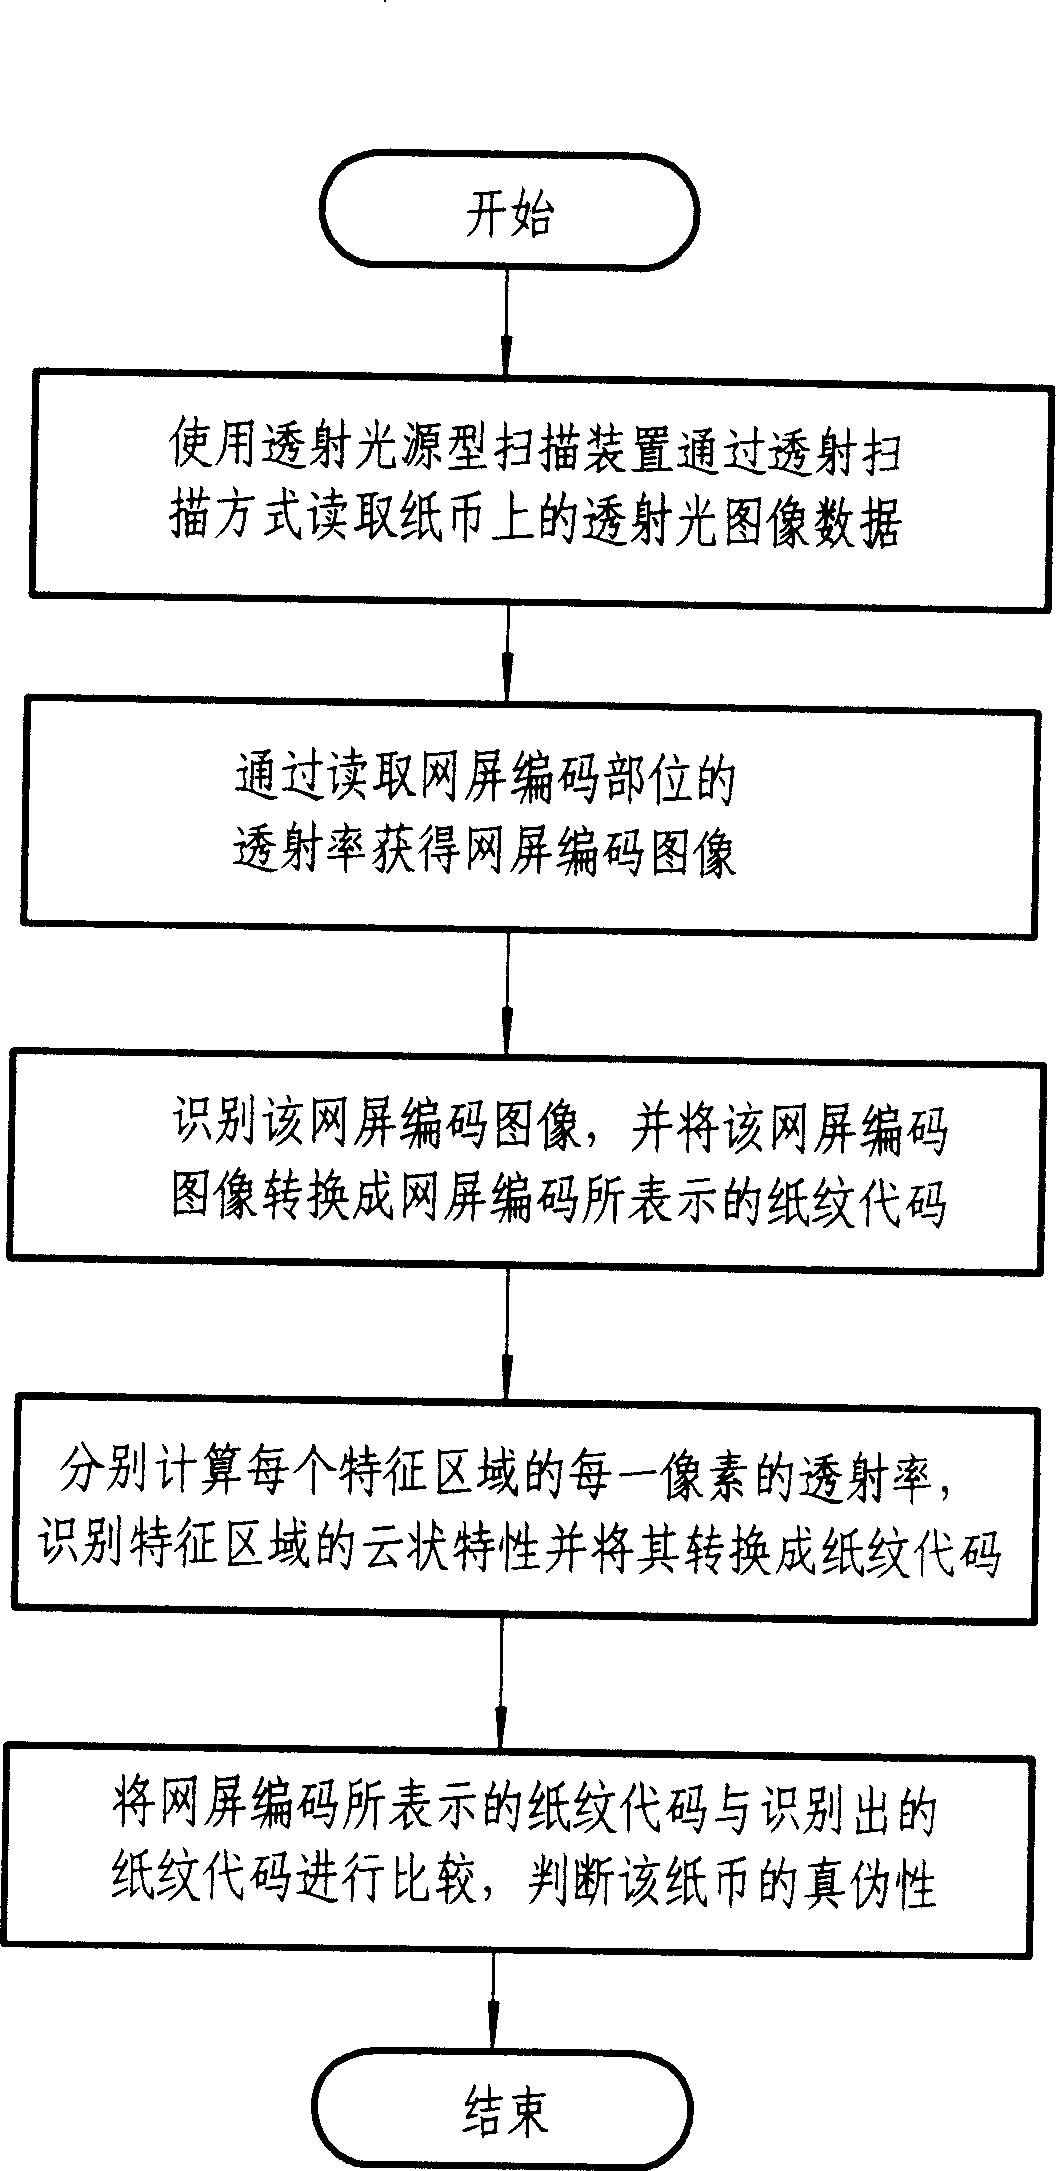 Processing method for guiding against false of paper currency